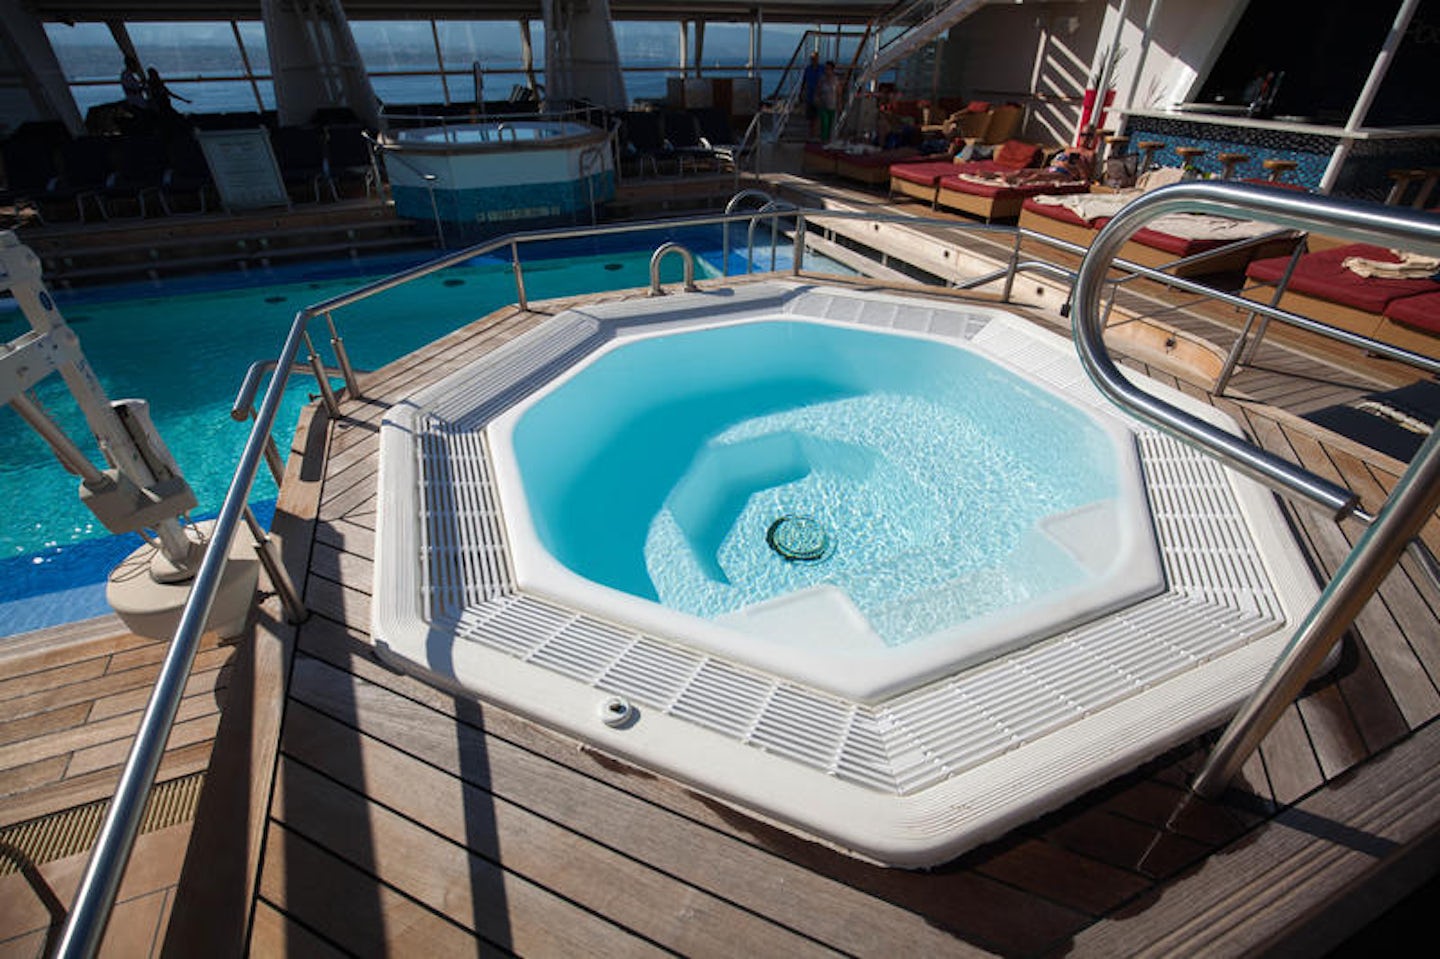 The Whirlpools on Celebrity Reflection